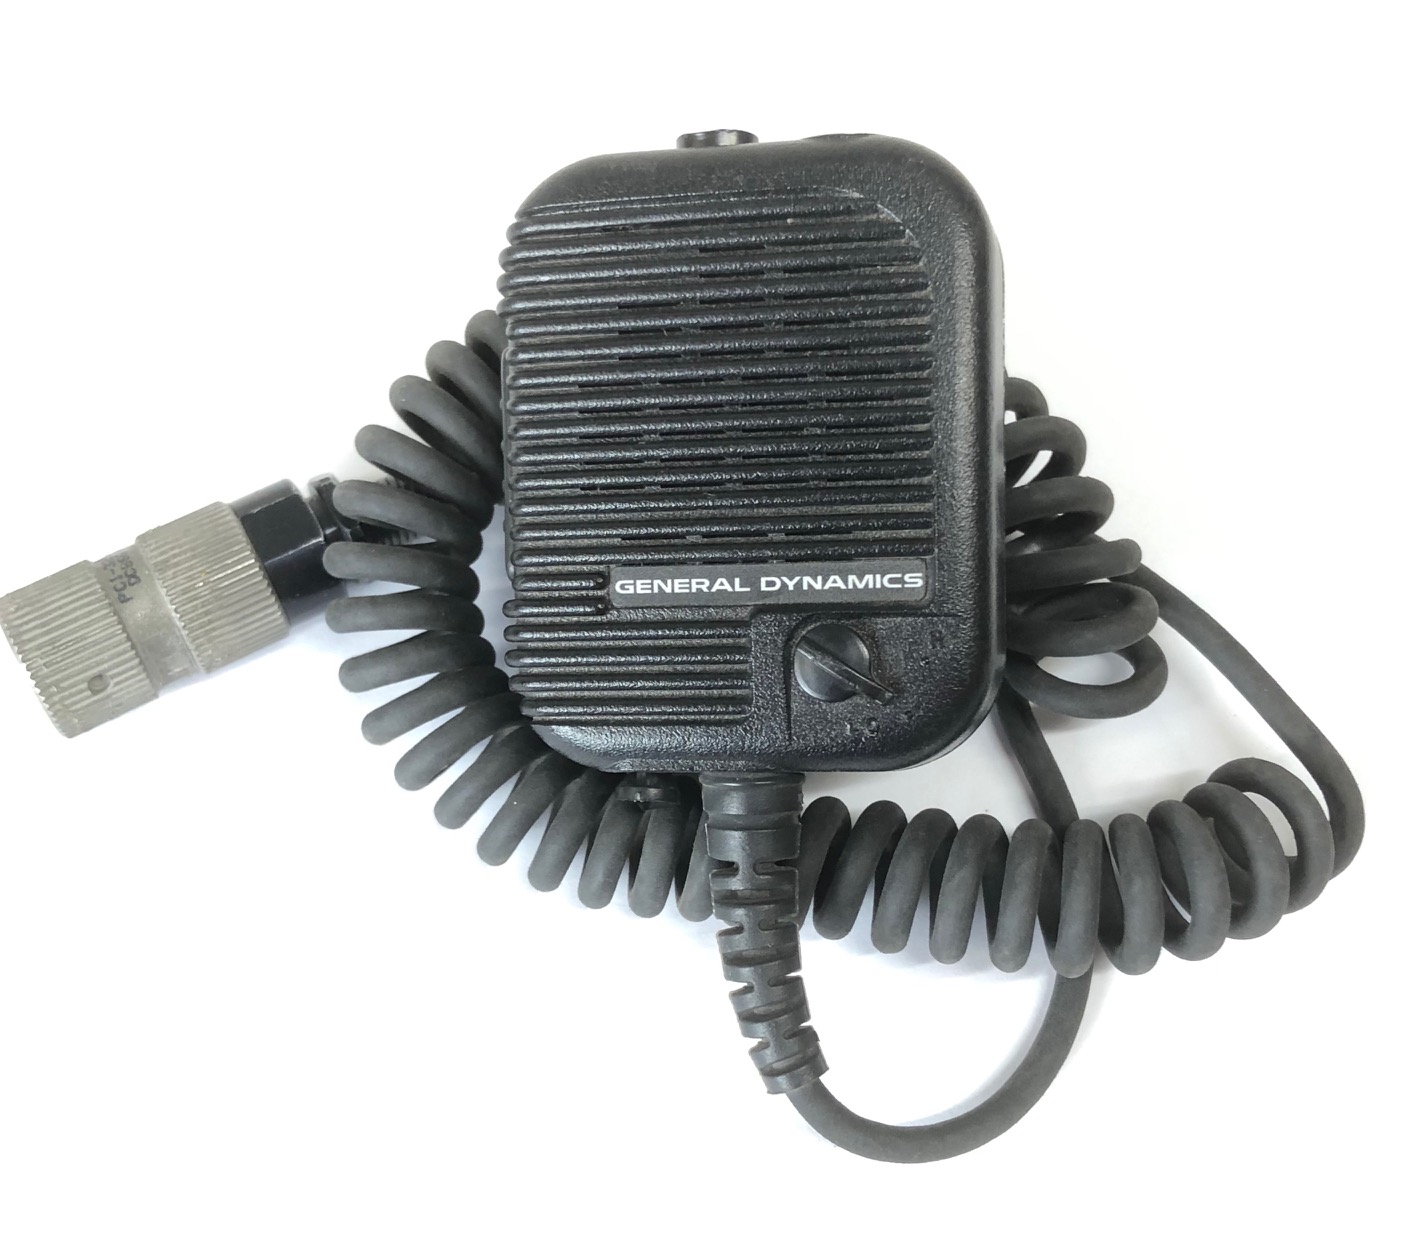 Otto/Thales for MBITR Military Speaker Microphone